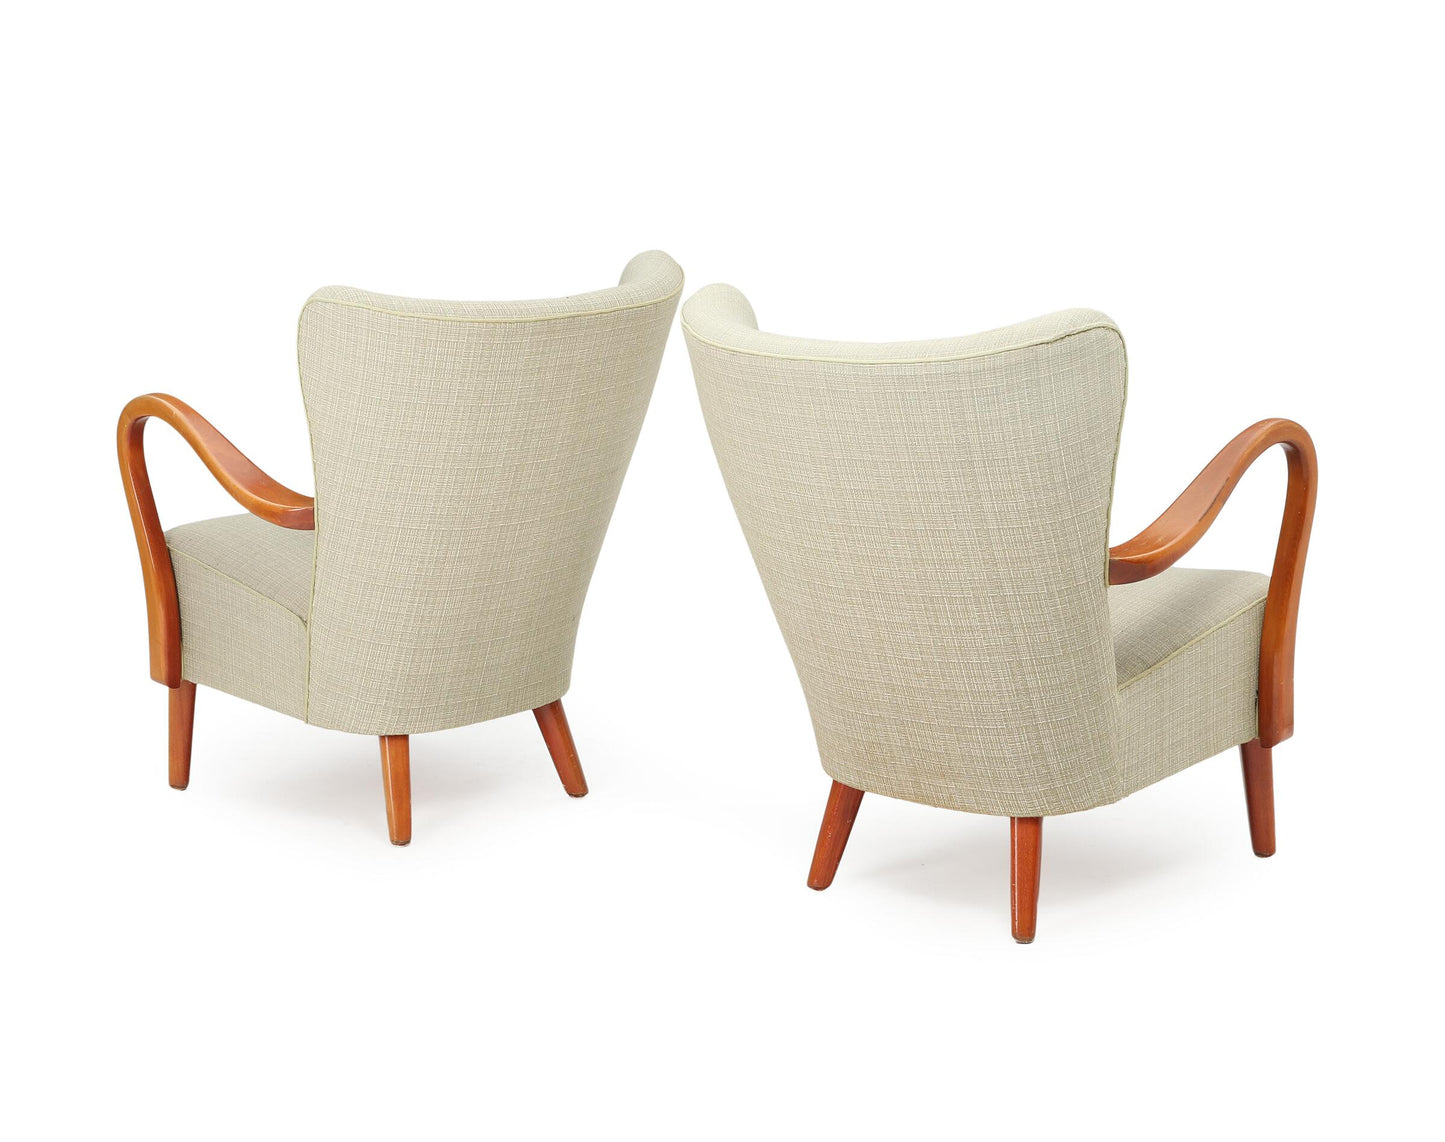 Alfred Christensen Danish Armchairs from the 1940s - SOLD!